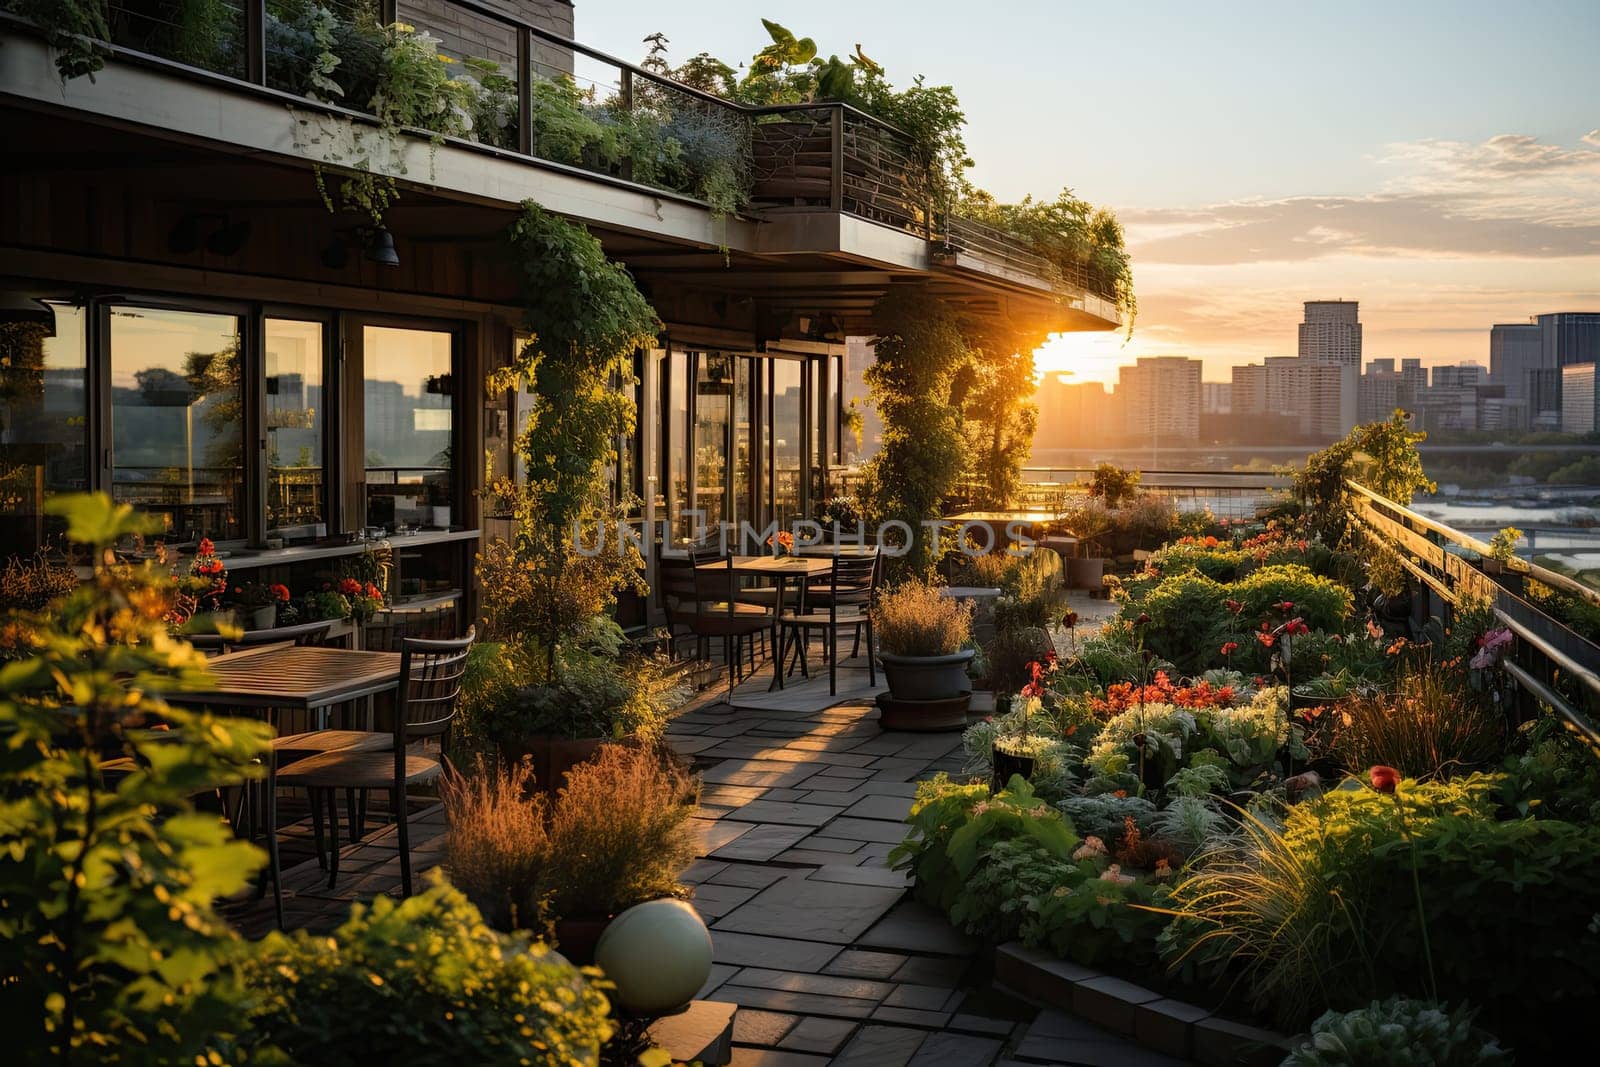 The Golden Glow: A Picturesque Sunset Over a Rooftop Restaurant